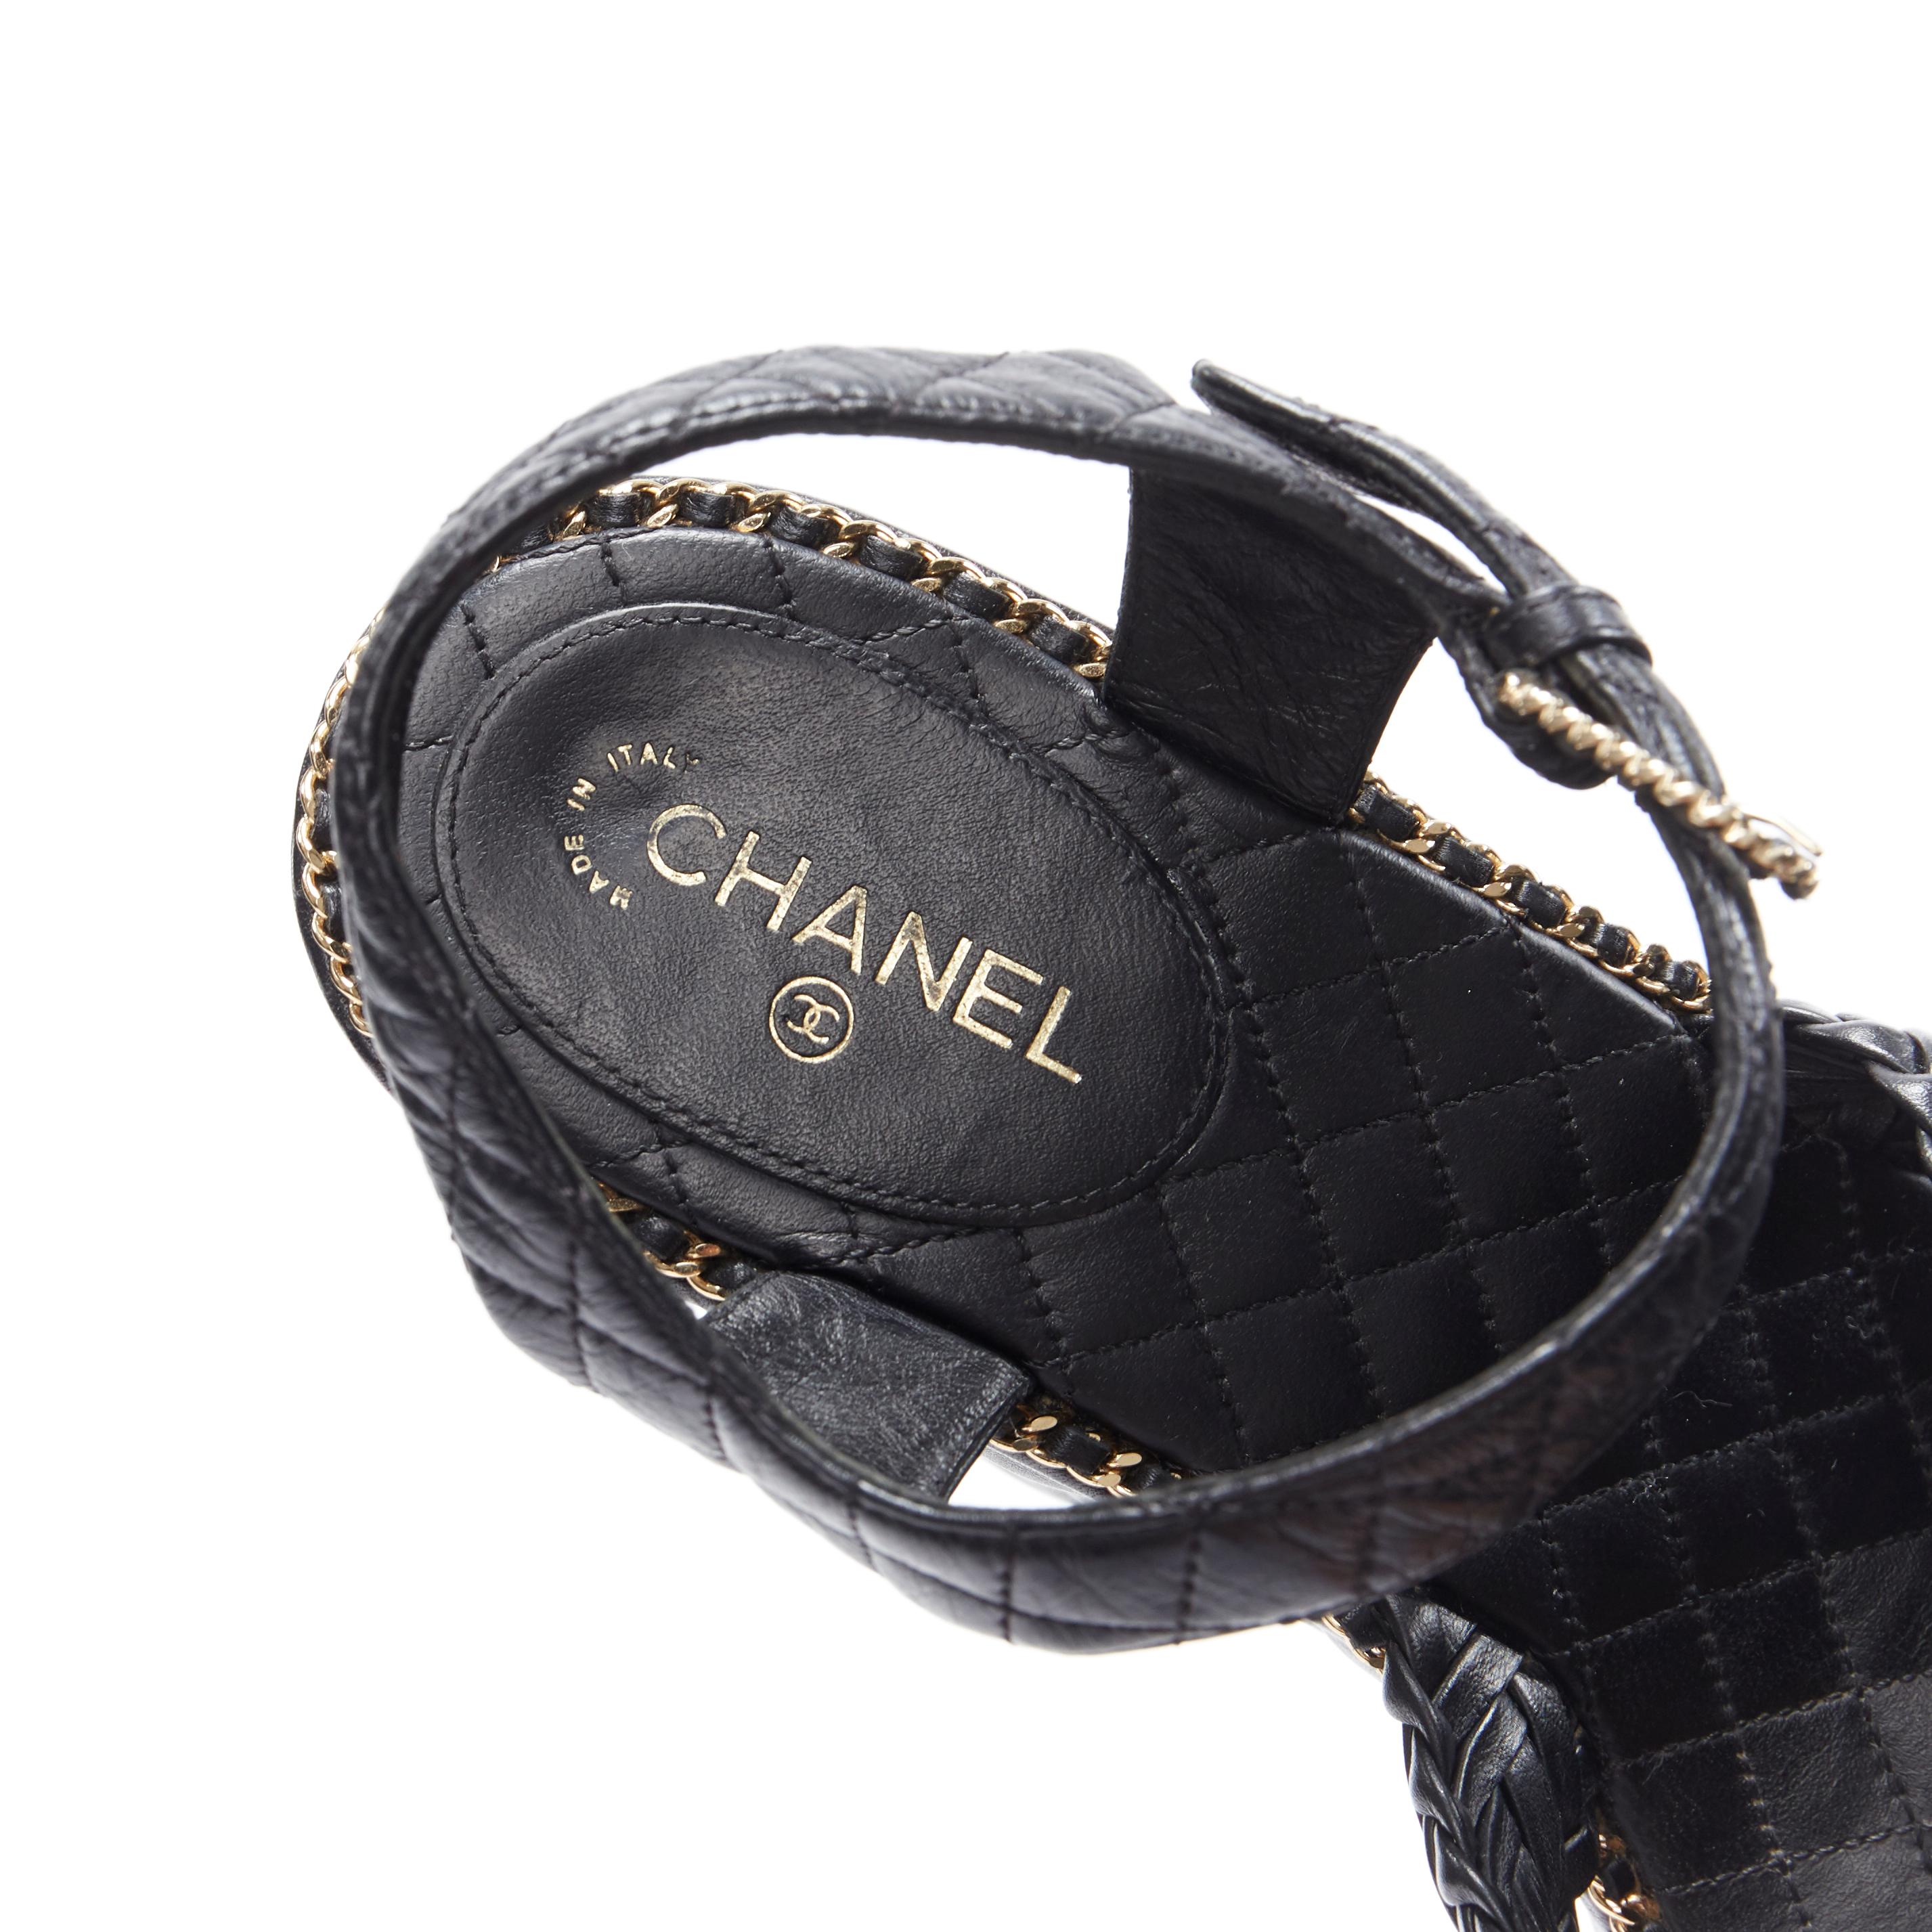 CHANEL SS15 black braided leather 2.55 chain diamond quilted wedge sandal EU39 3